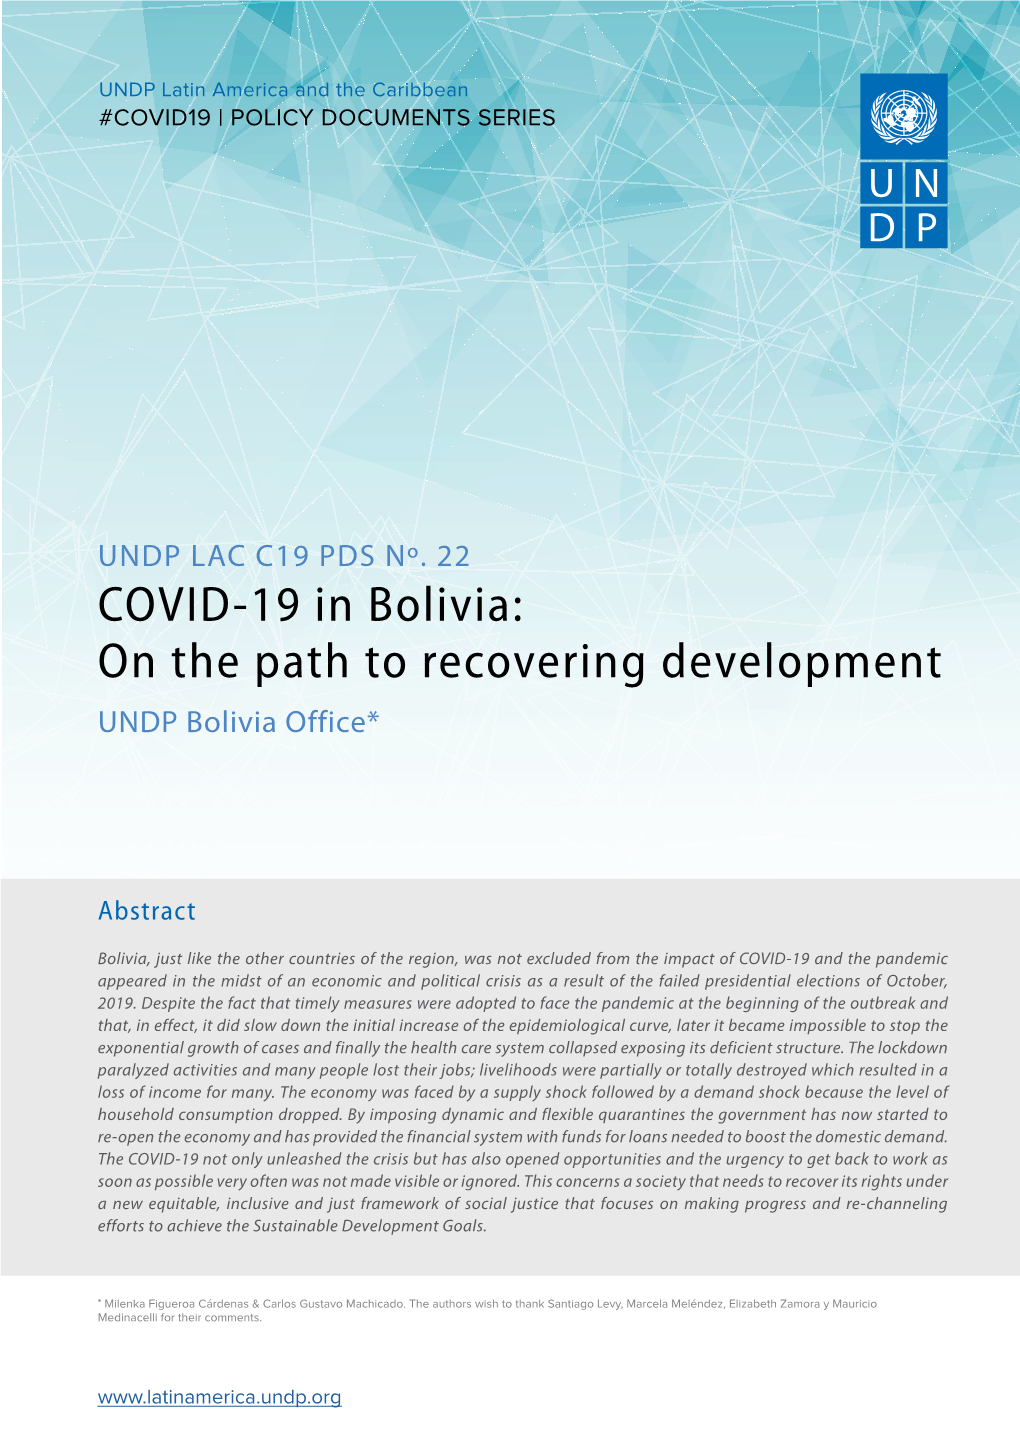 COVID-19 in Bolivia: on the Path to Recovering Development UNDP Bolivia Office*